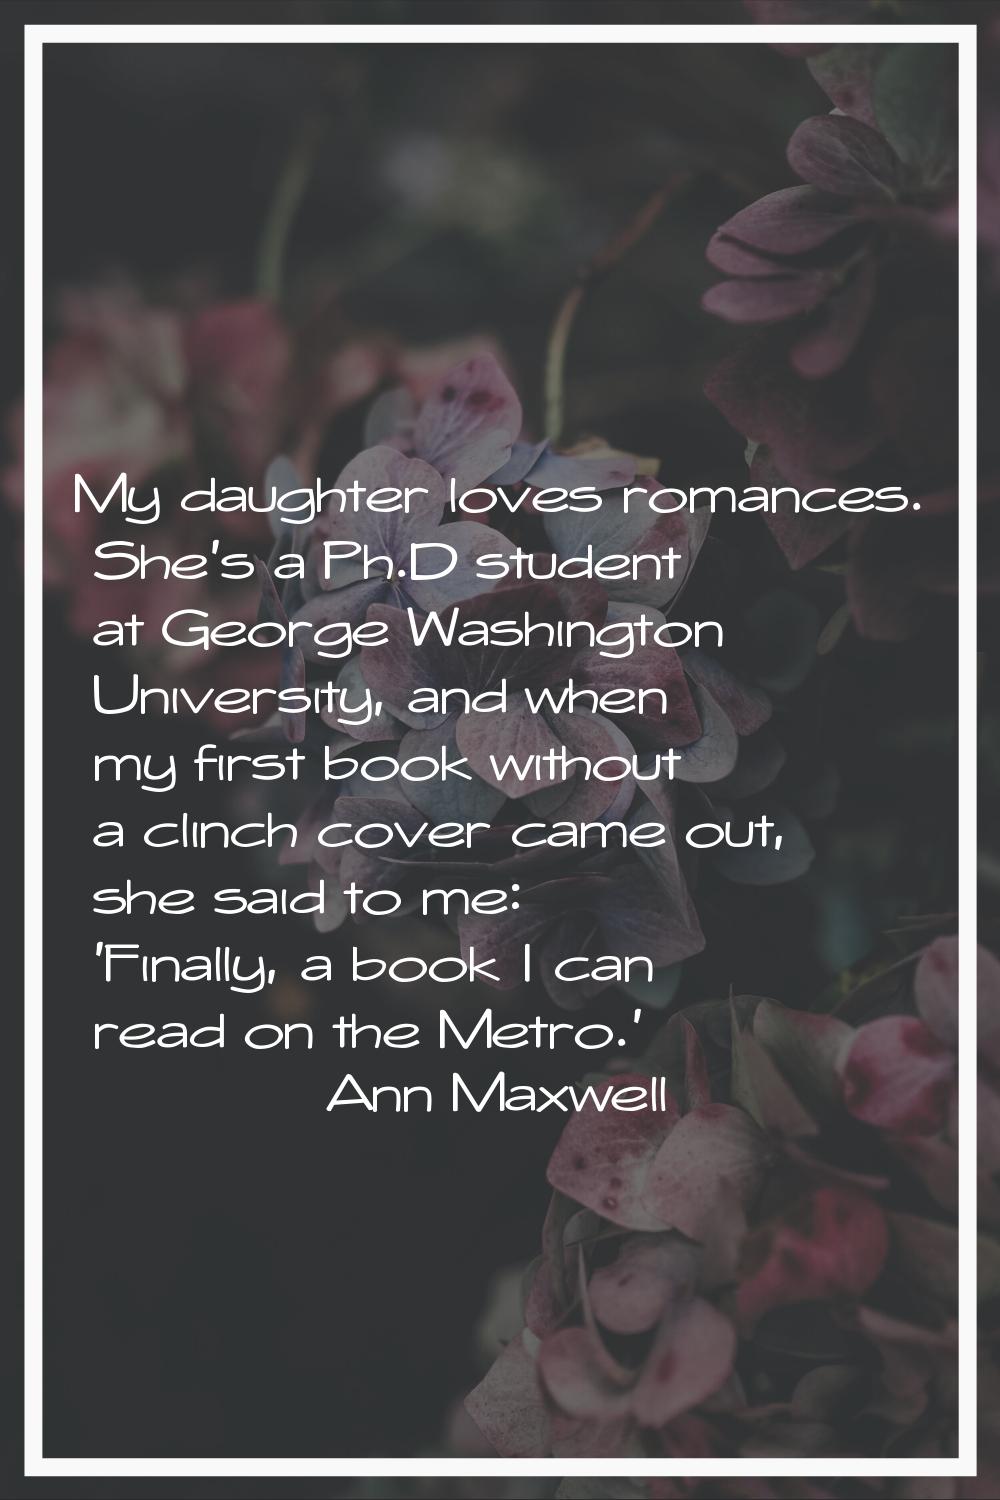 My daughter loves romances. She's a Ph.D student at George Washington University, and when my first